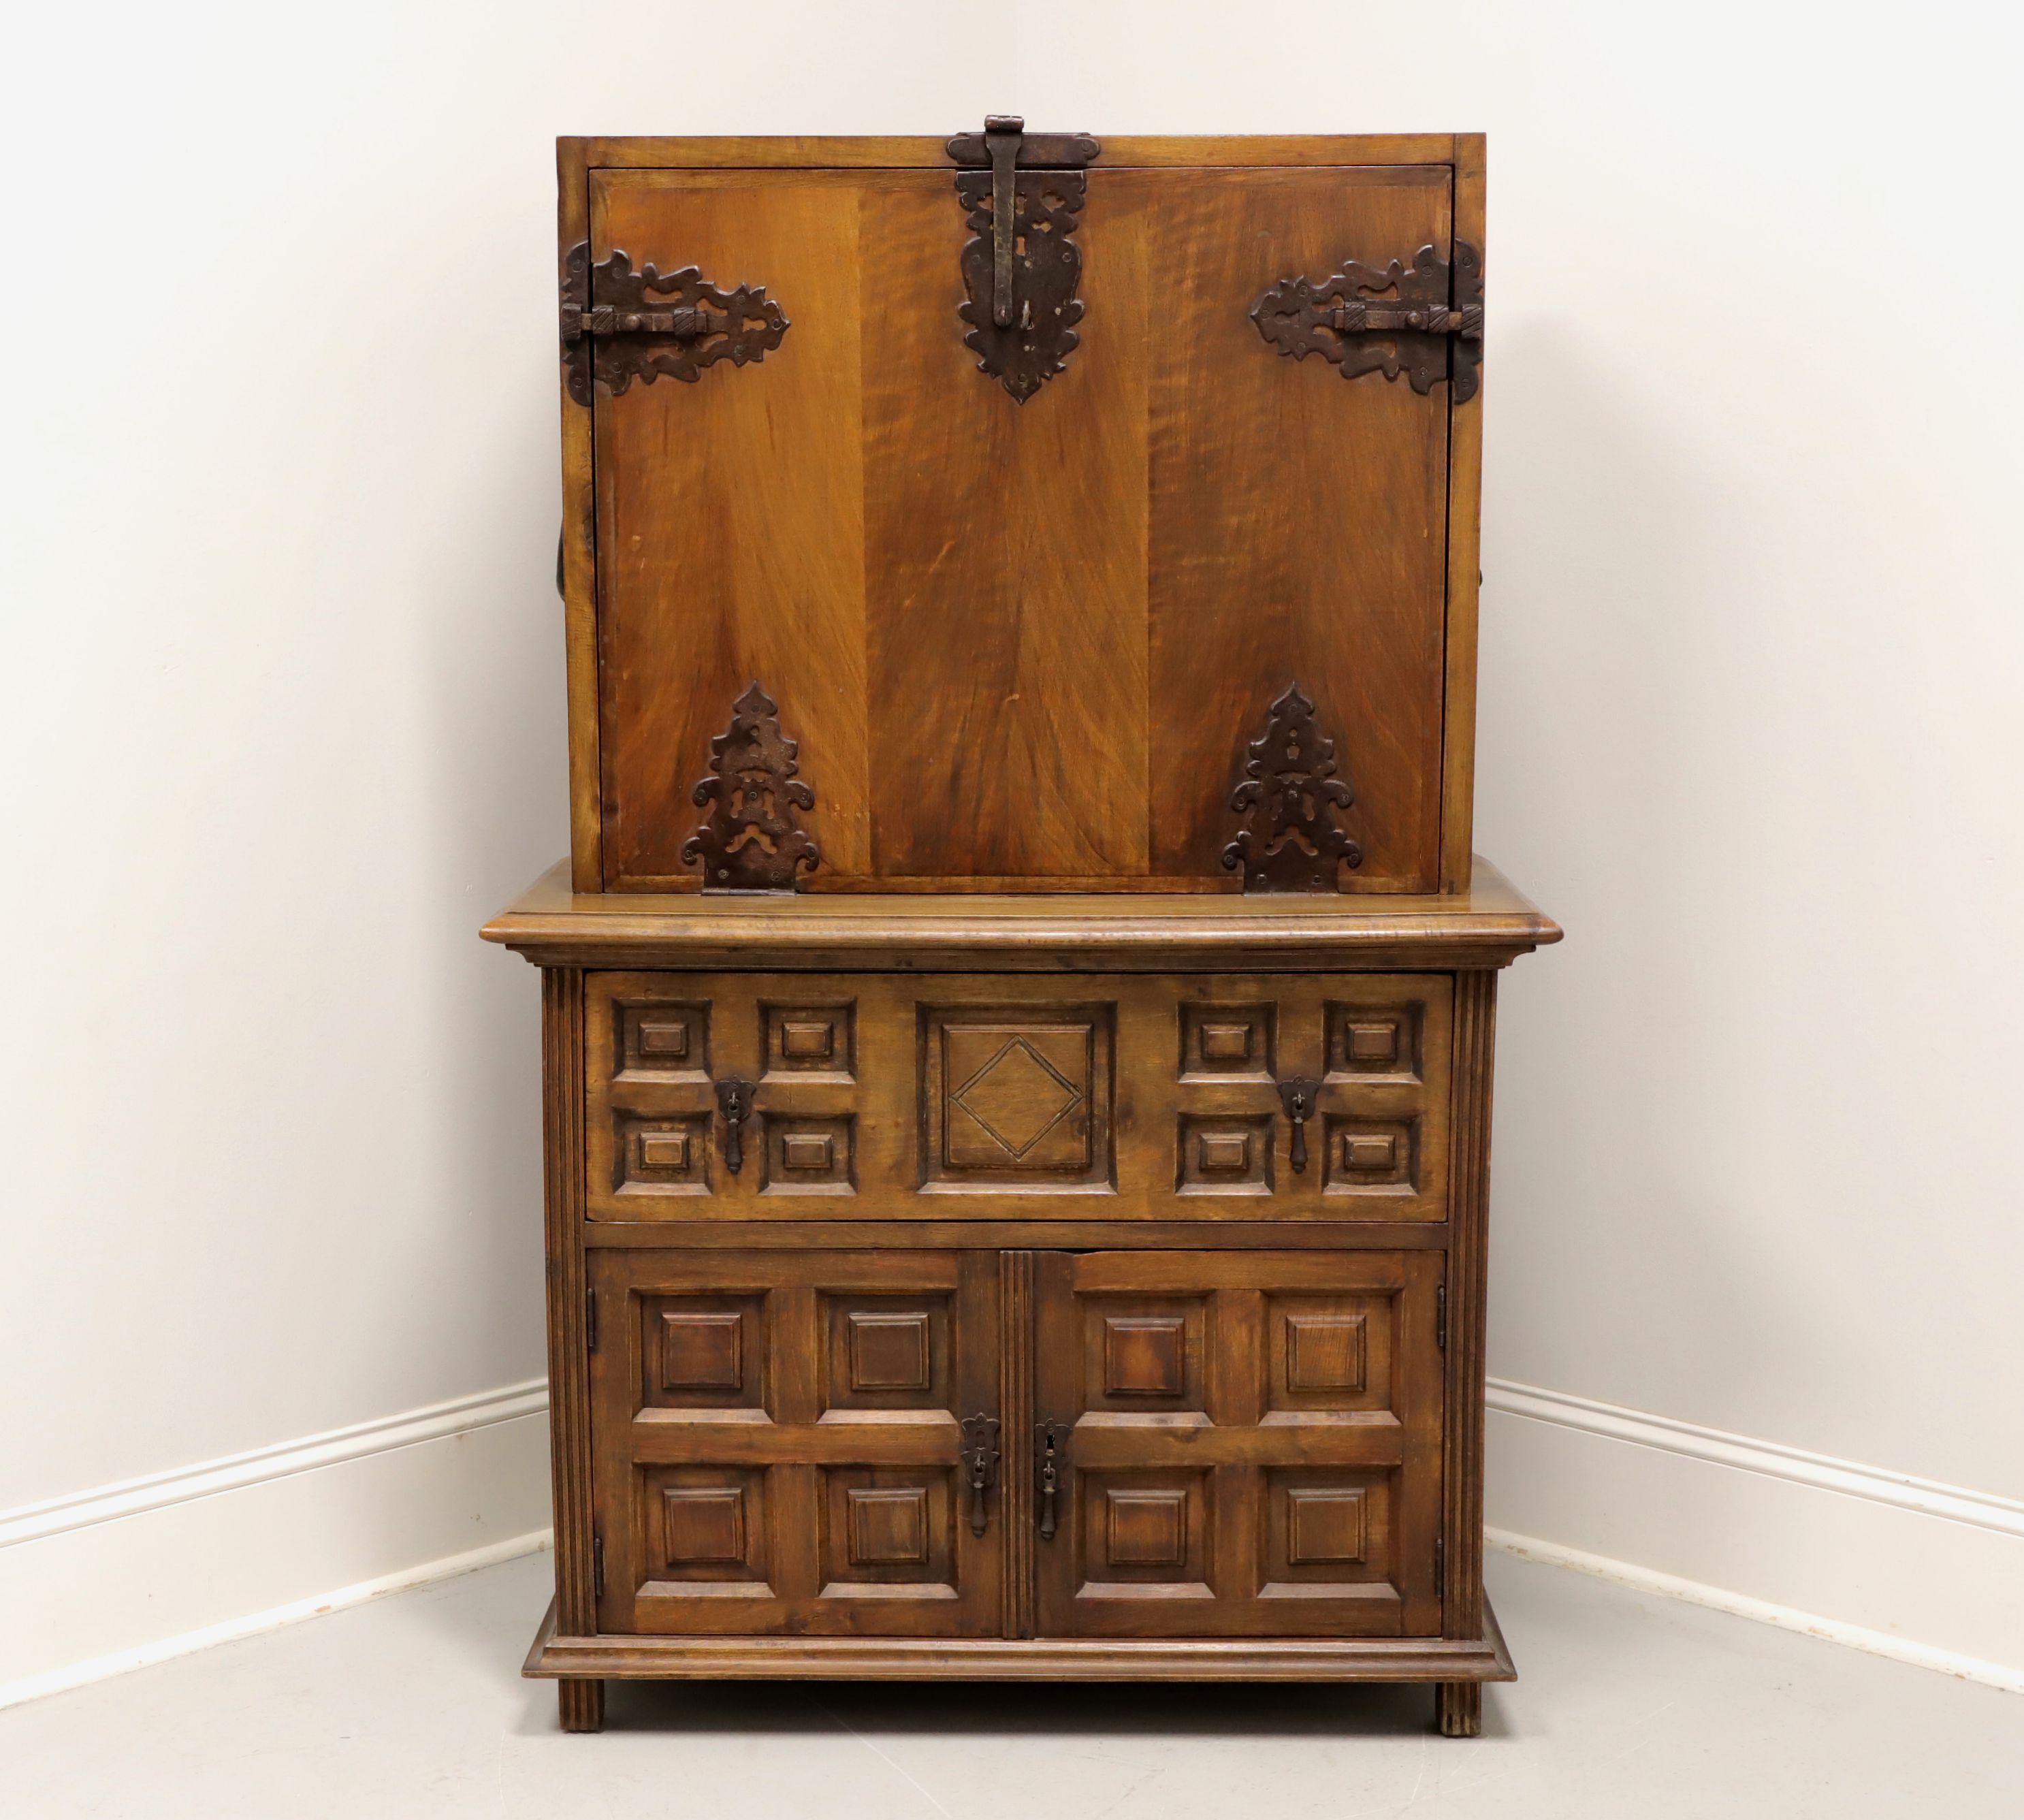 An antique Spanish style secretaire desk, a match to one found in the collection at The Hemingway House in Key West, FL, USA; unbranded. Solid walnut with iron hardware. Upper is the drop down desk surface door with decorative iron hinges, slide